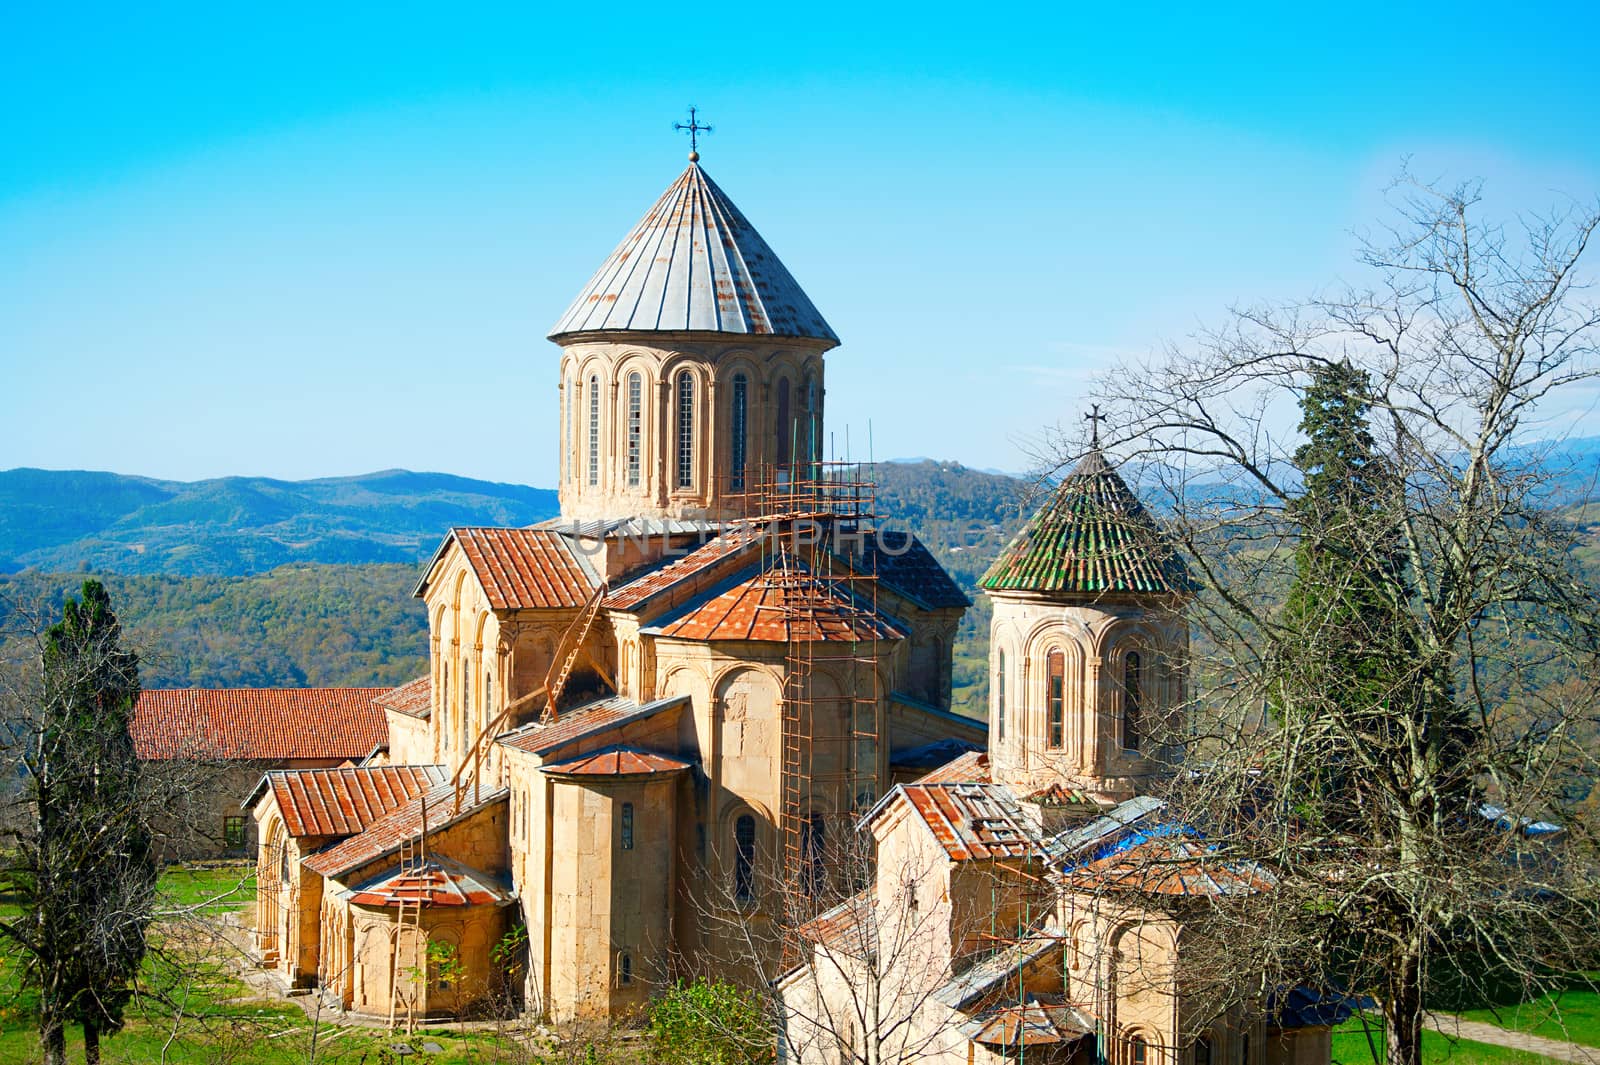 Gelati Monastery , Georgia. It contains the Church of the Virgin founded by the King of Georgia David the Builder in 1106, and the 13th-century churches of St George and St Nicholas.